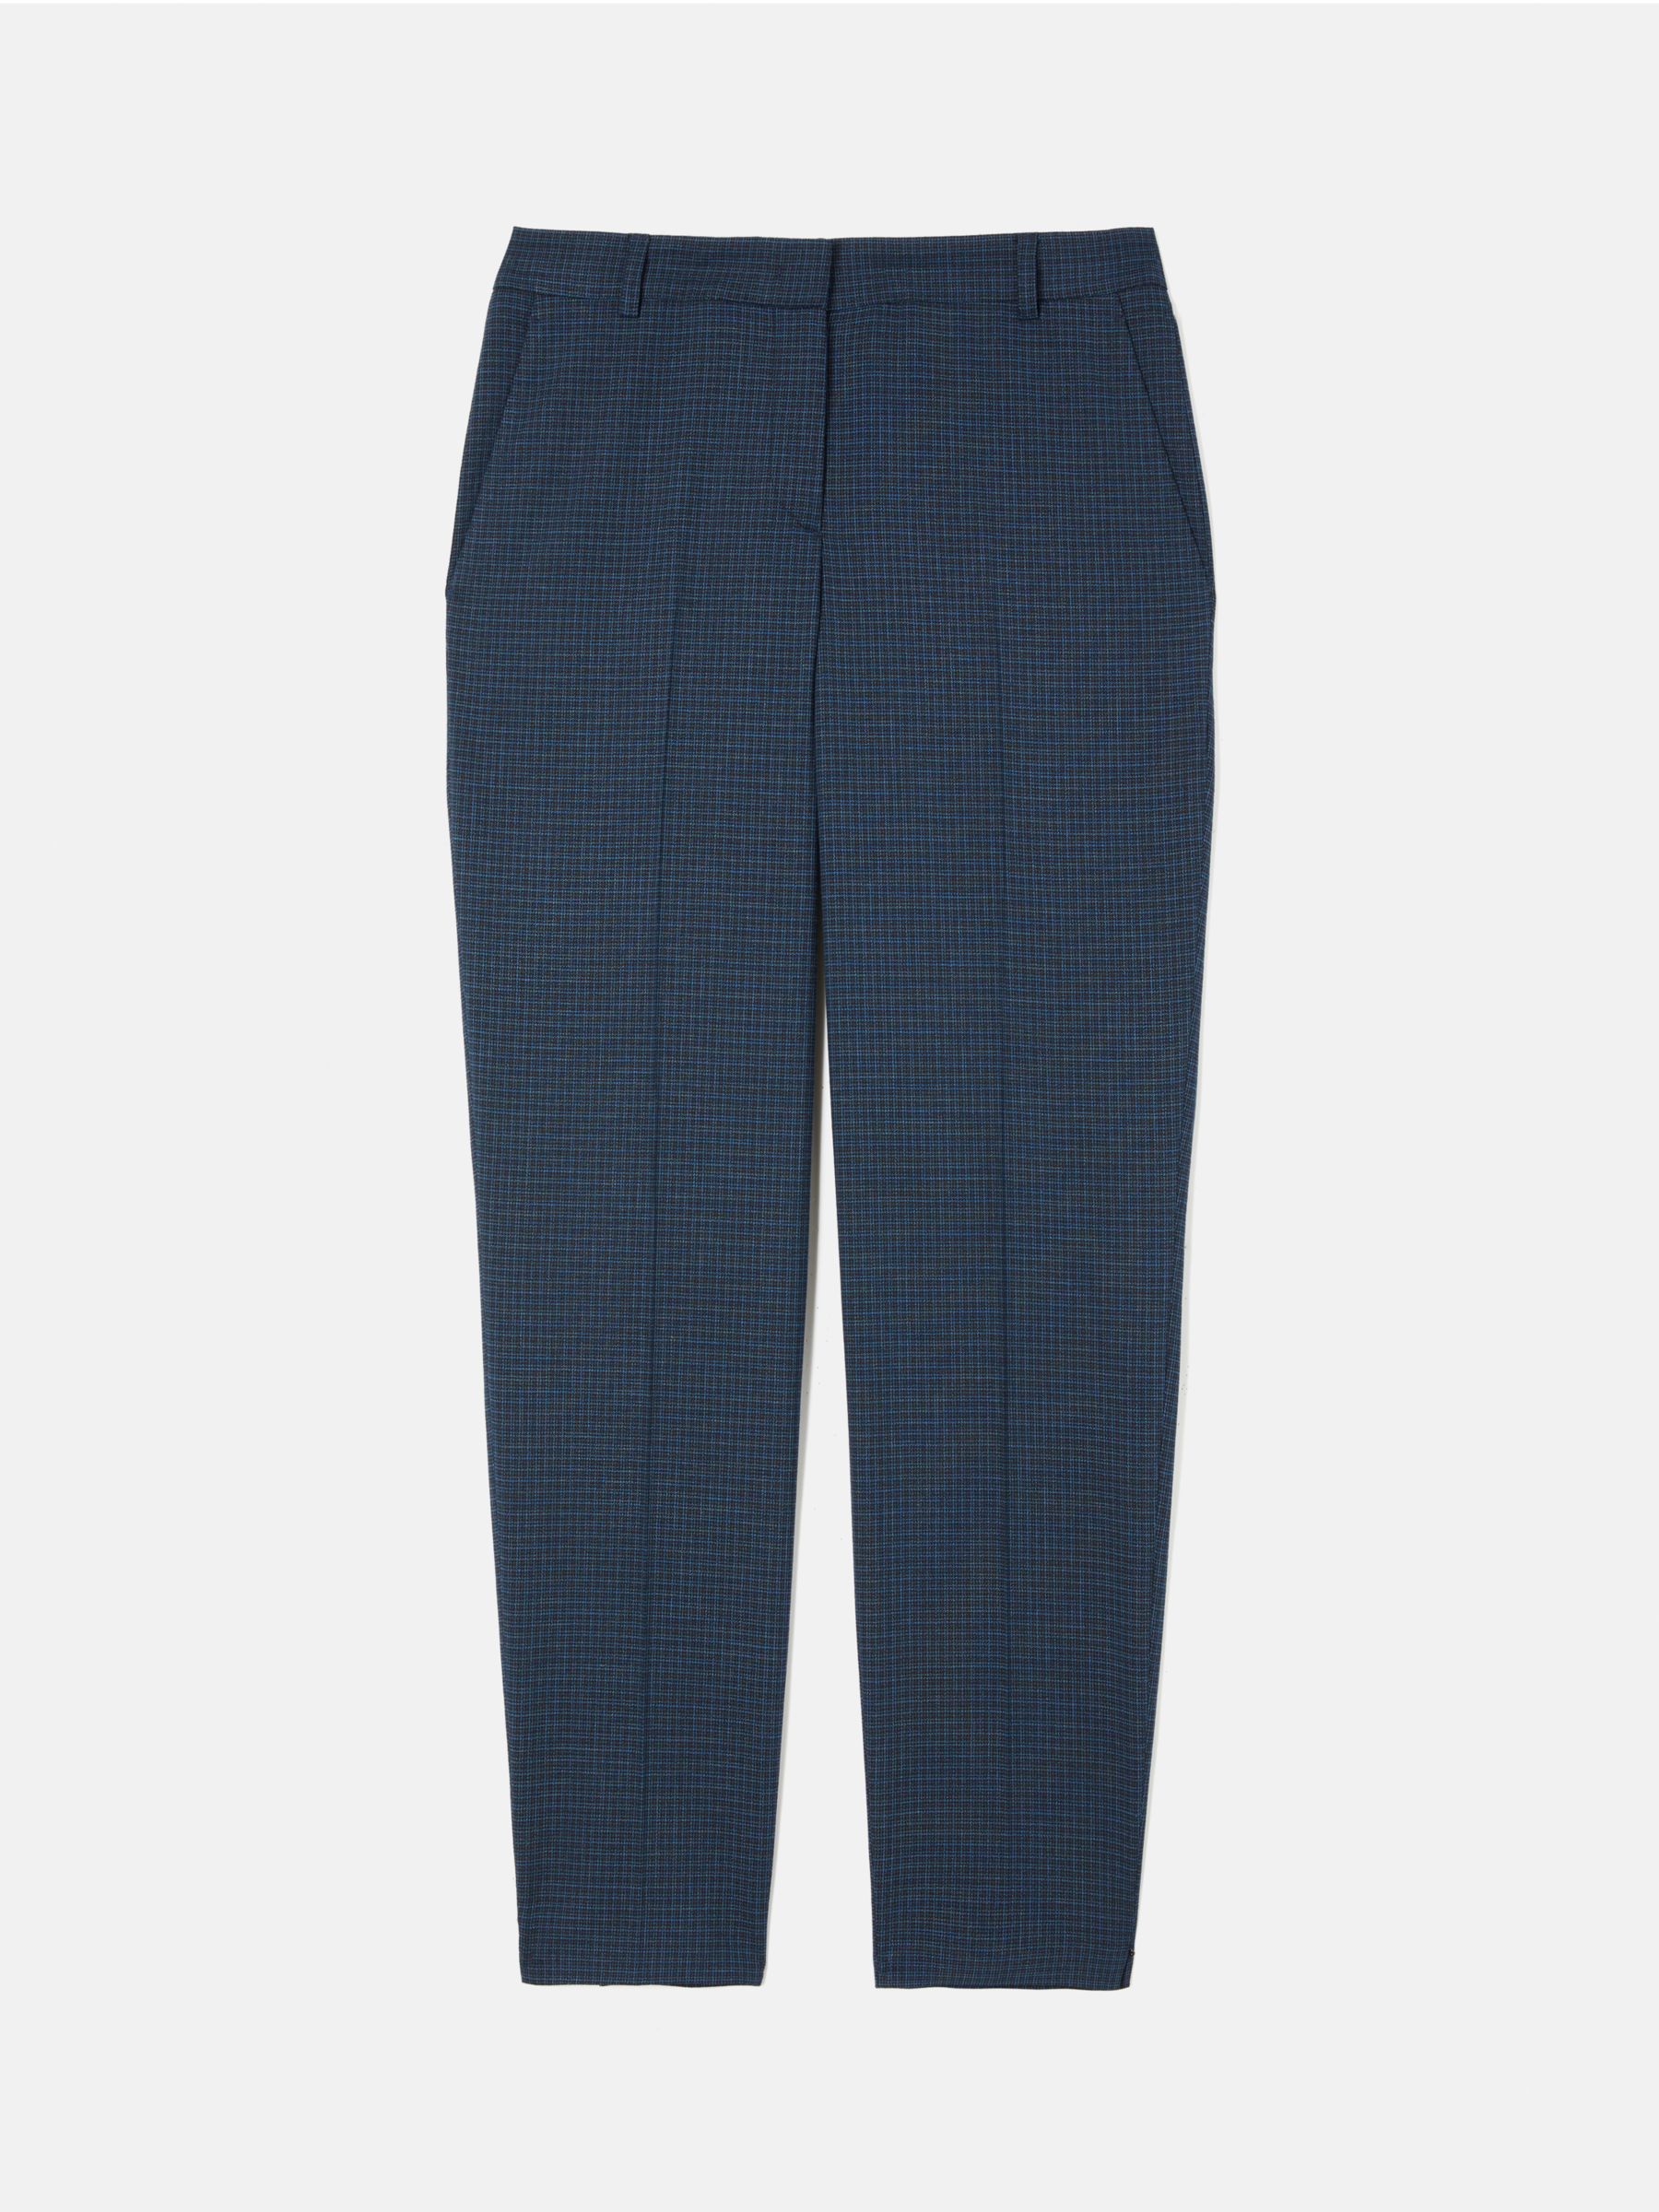 Jigsaw Palmer Gingham Check Trousers, Navy, 8